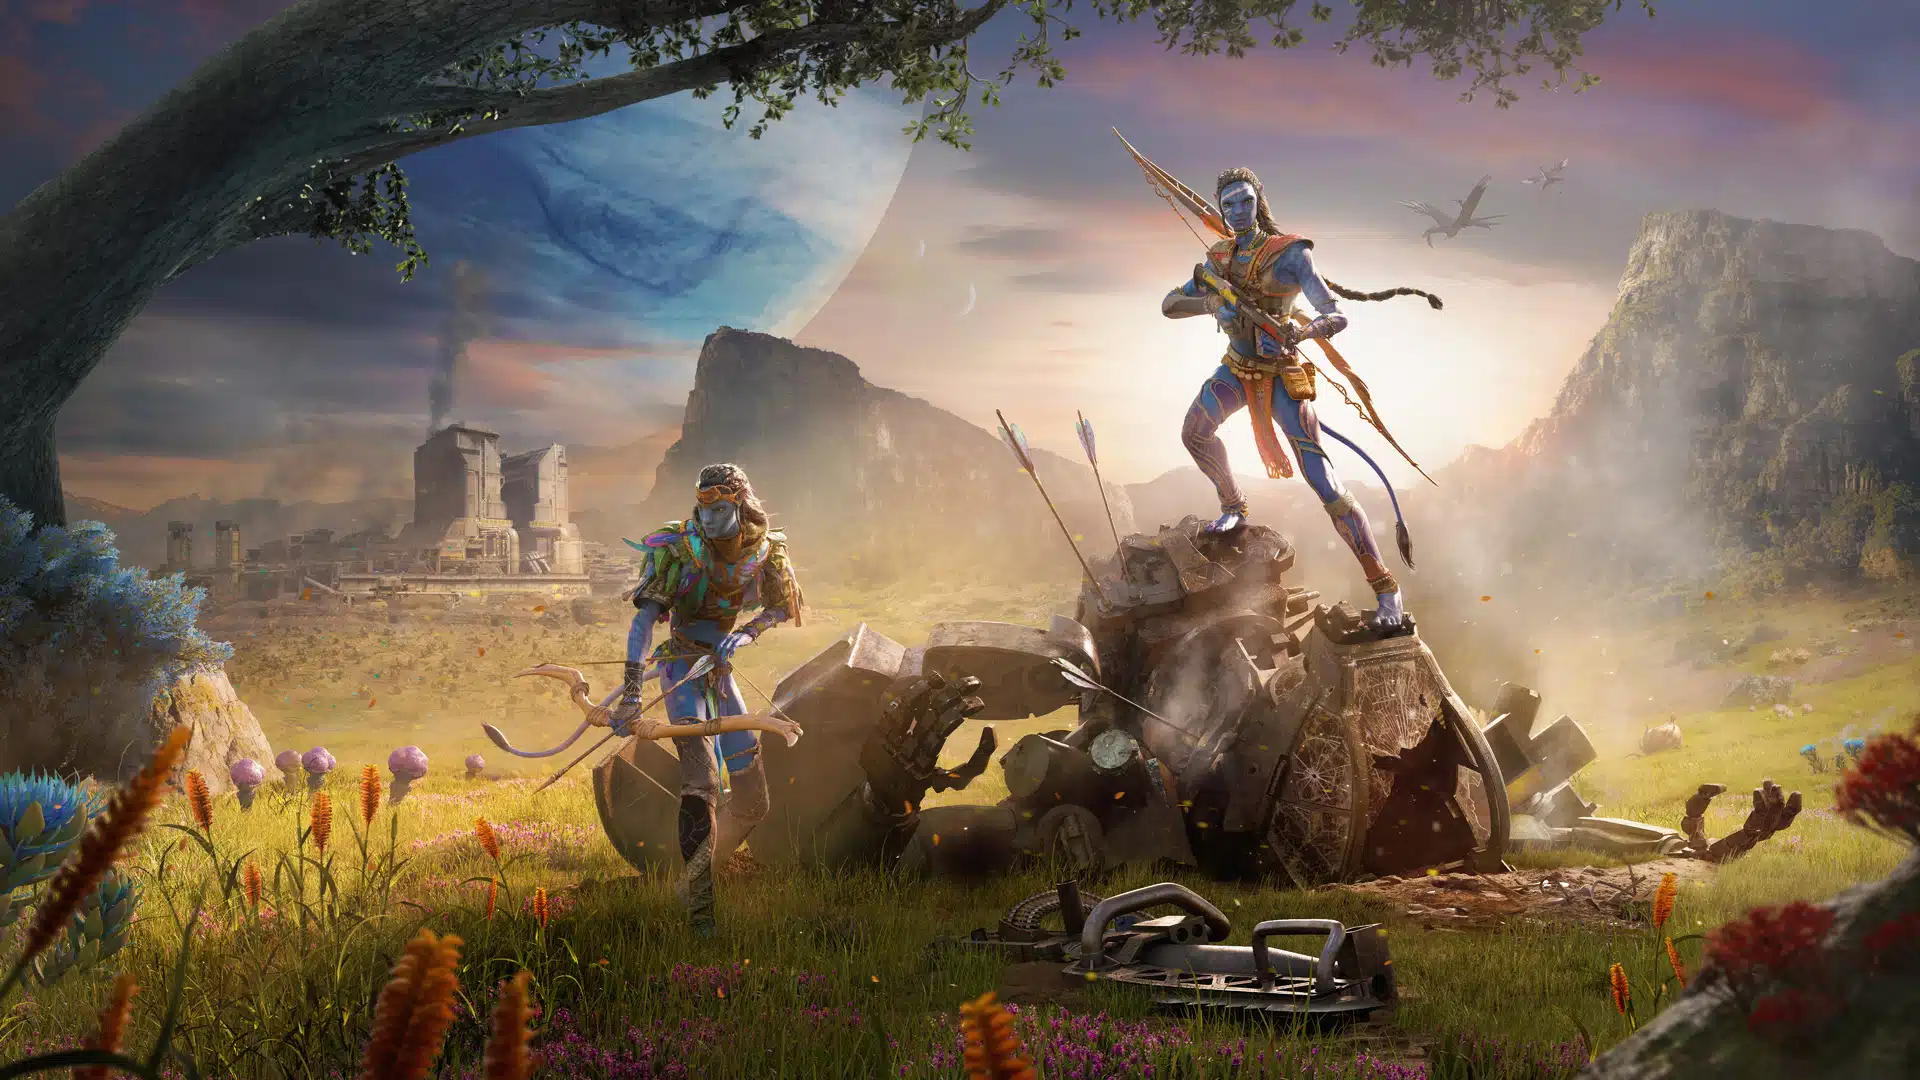 Avatar Frontiers of Pandora PC features